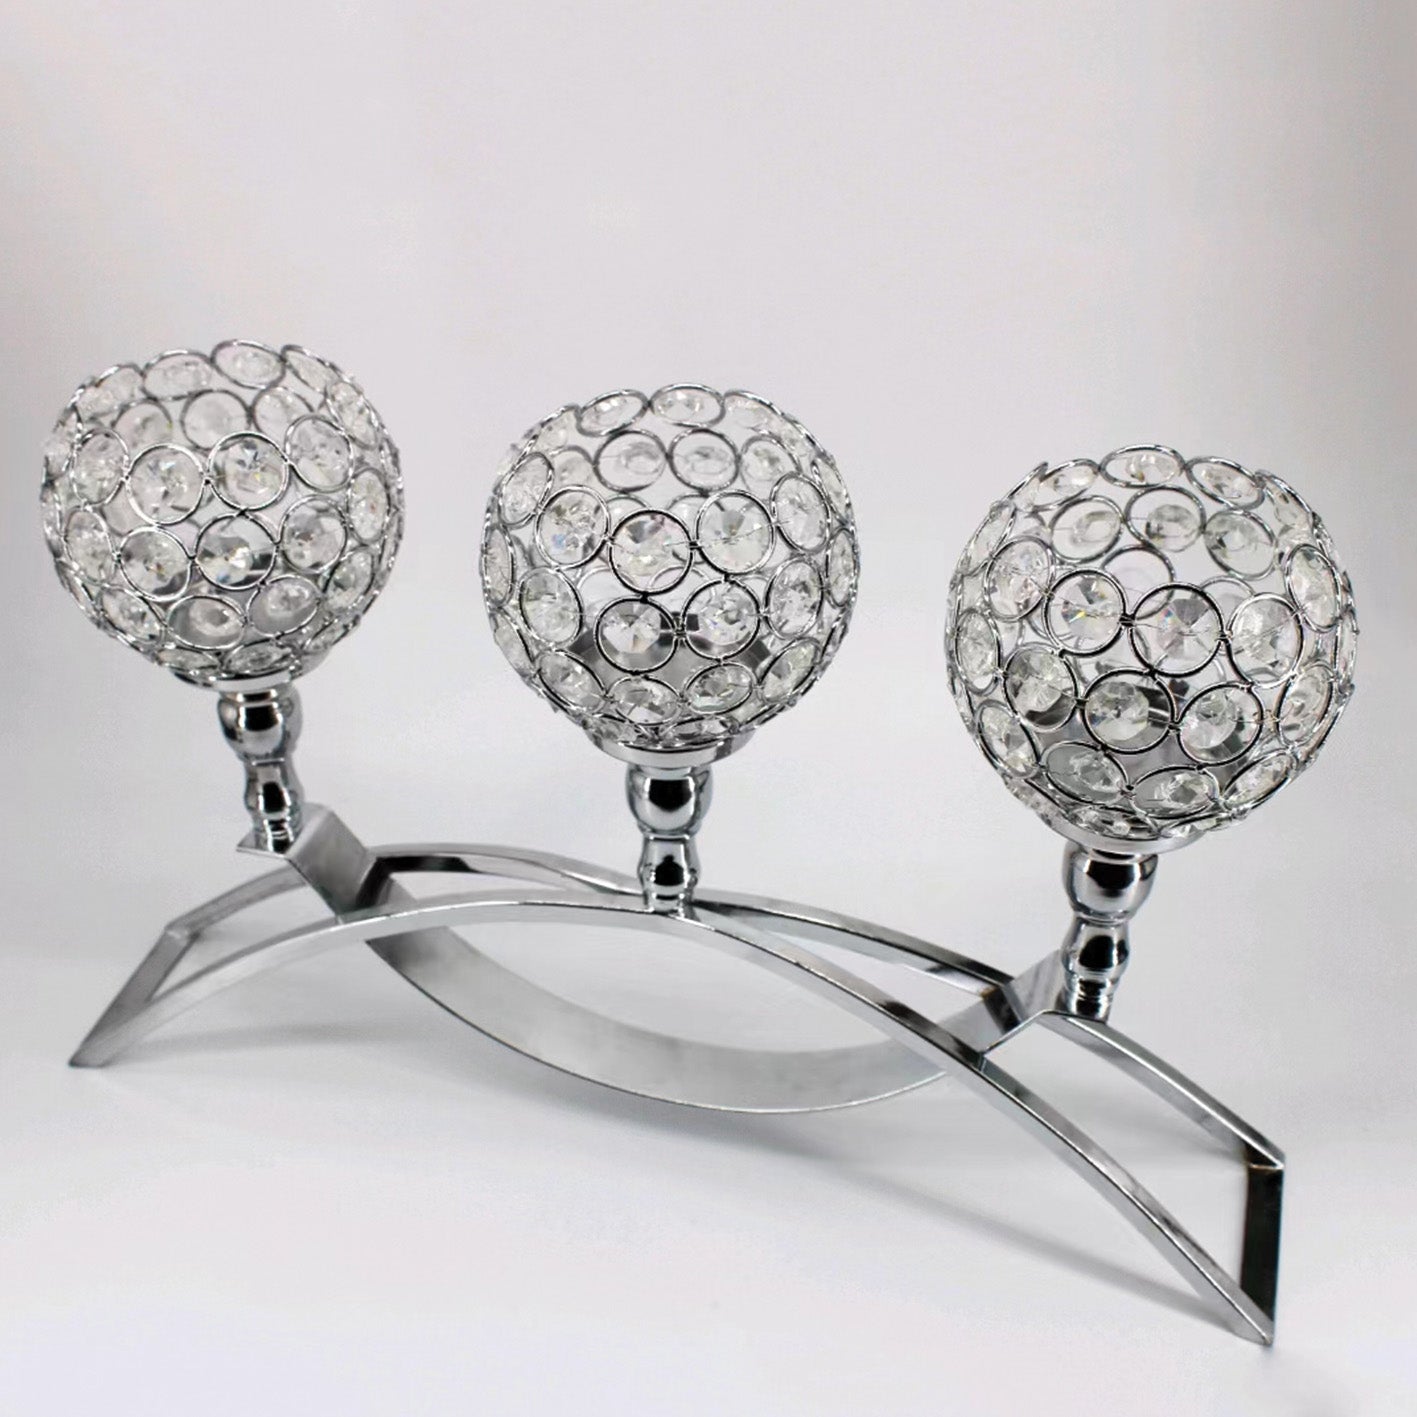 Crystal Candle Holders - 34216-11